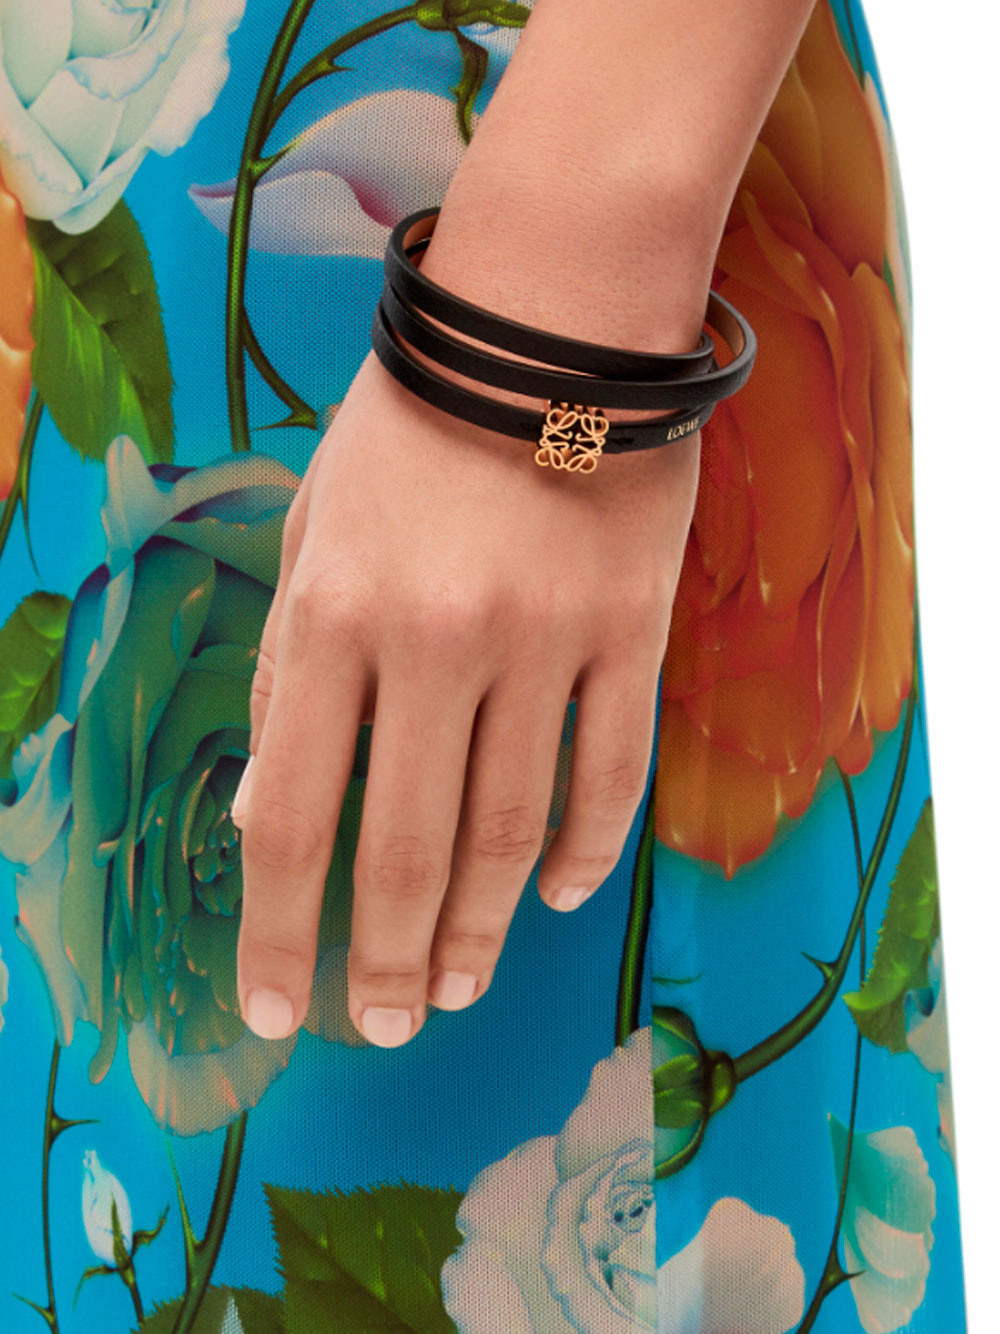 Twist bangle in leather